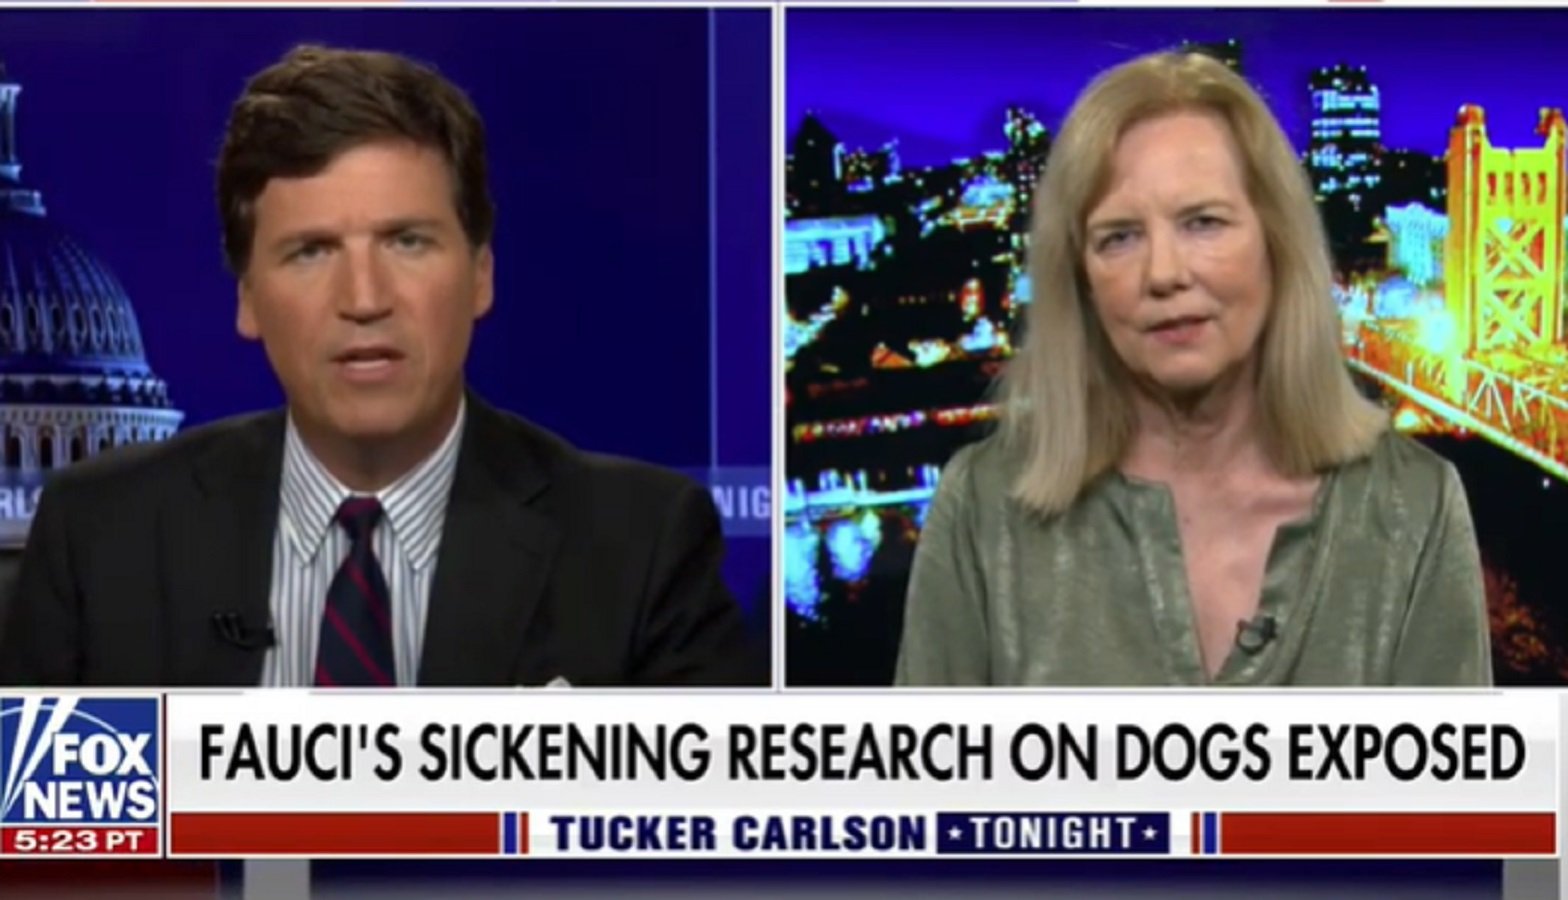  Tucker Carlson Hosts Ghoulish Animal Killing PETA to Discuss Fauci Animal Tests — Instead of Org Who Actually Exposed it